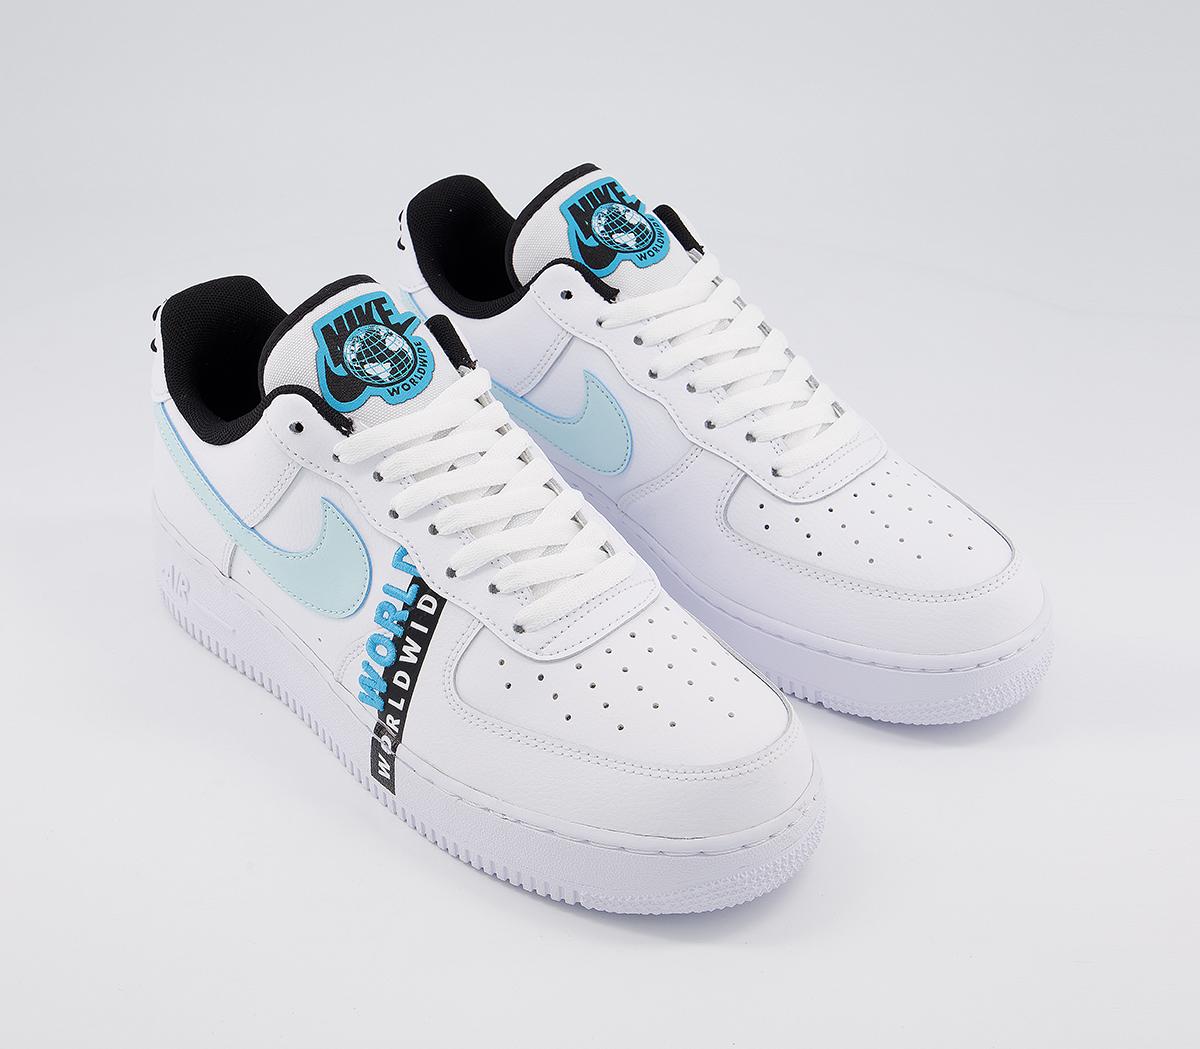 Nike Air Force 1 07 Trainers White Black Blue Fury Ww - His trainers